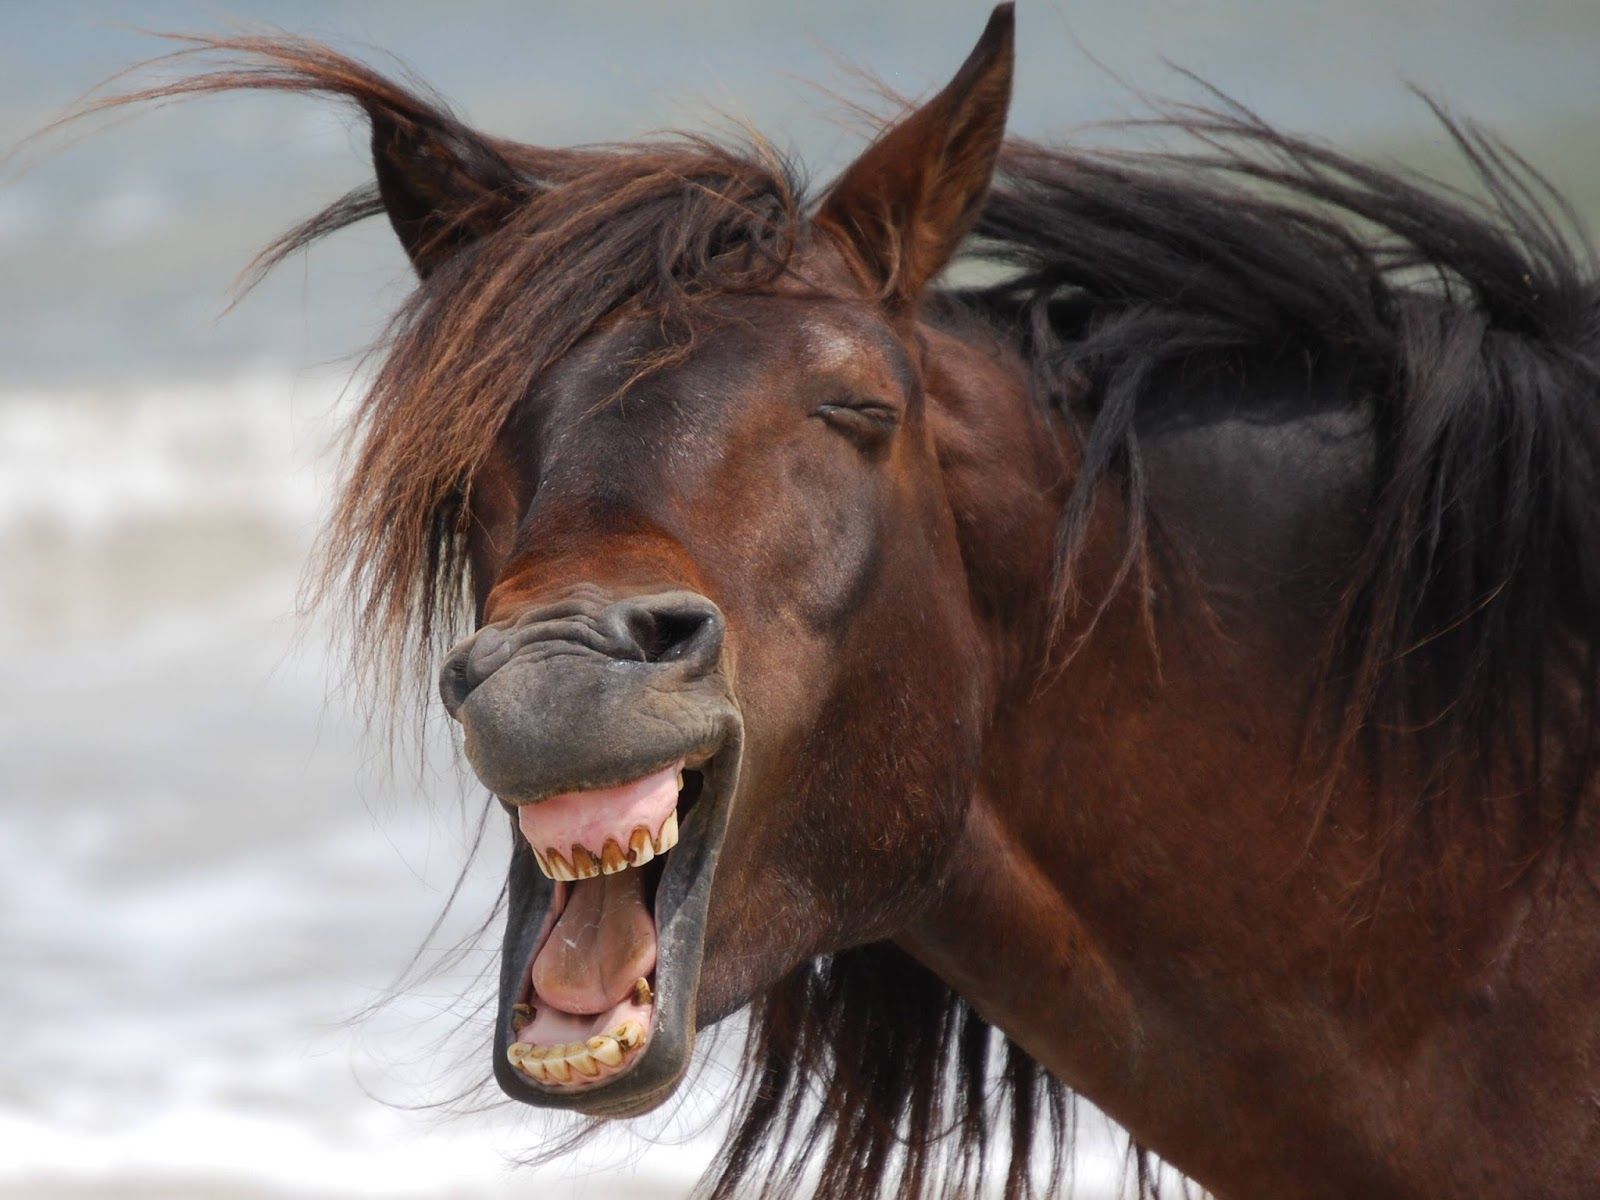 Funny Horse HD Wallpaper. Funny horse picture, Laughing animals, Funny horse videos